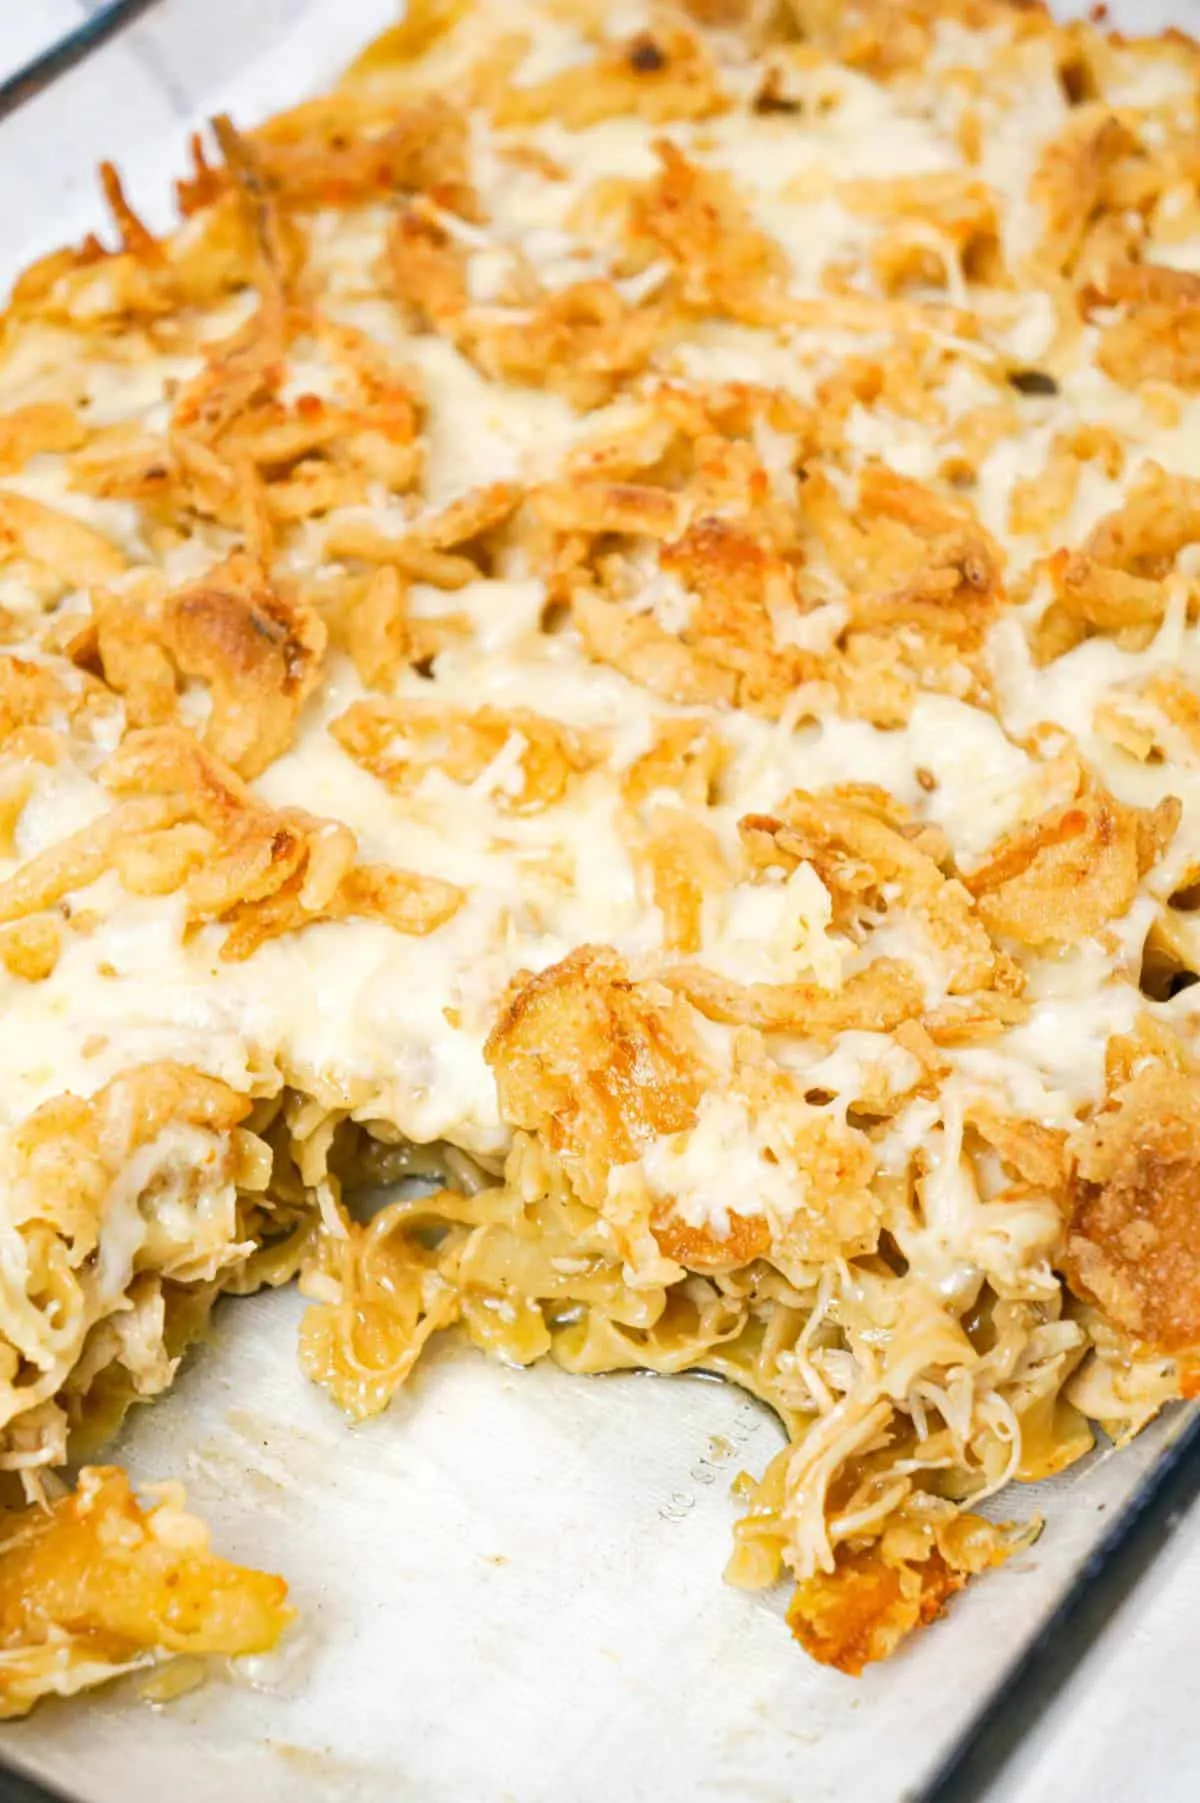 French Onion Chicken Casserole is a hearty casserole recipe loaded with shredded chicken, egg noodles, onion soup mix, cream of chicken soup, mozzarella cheese, parmesan cheese and French's crispy fried onions.